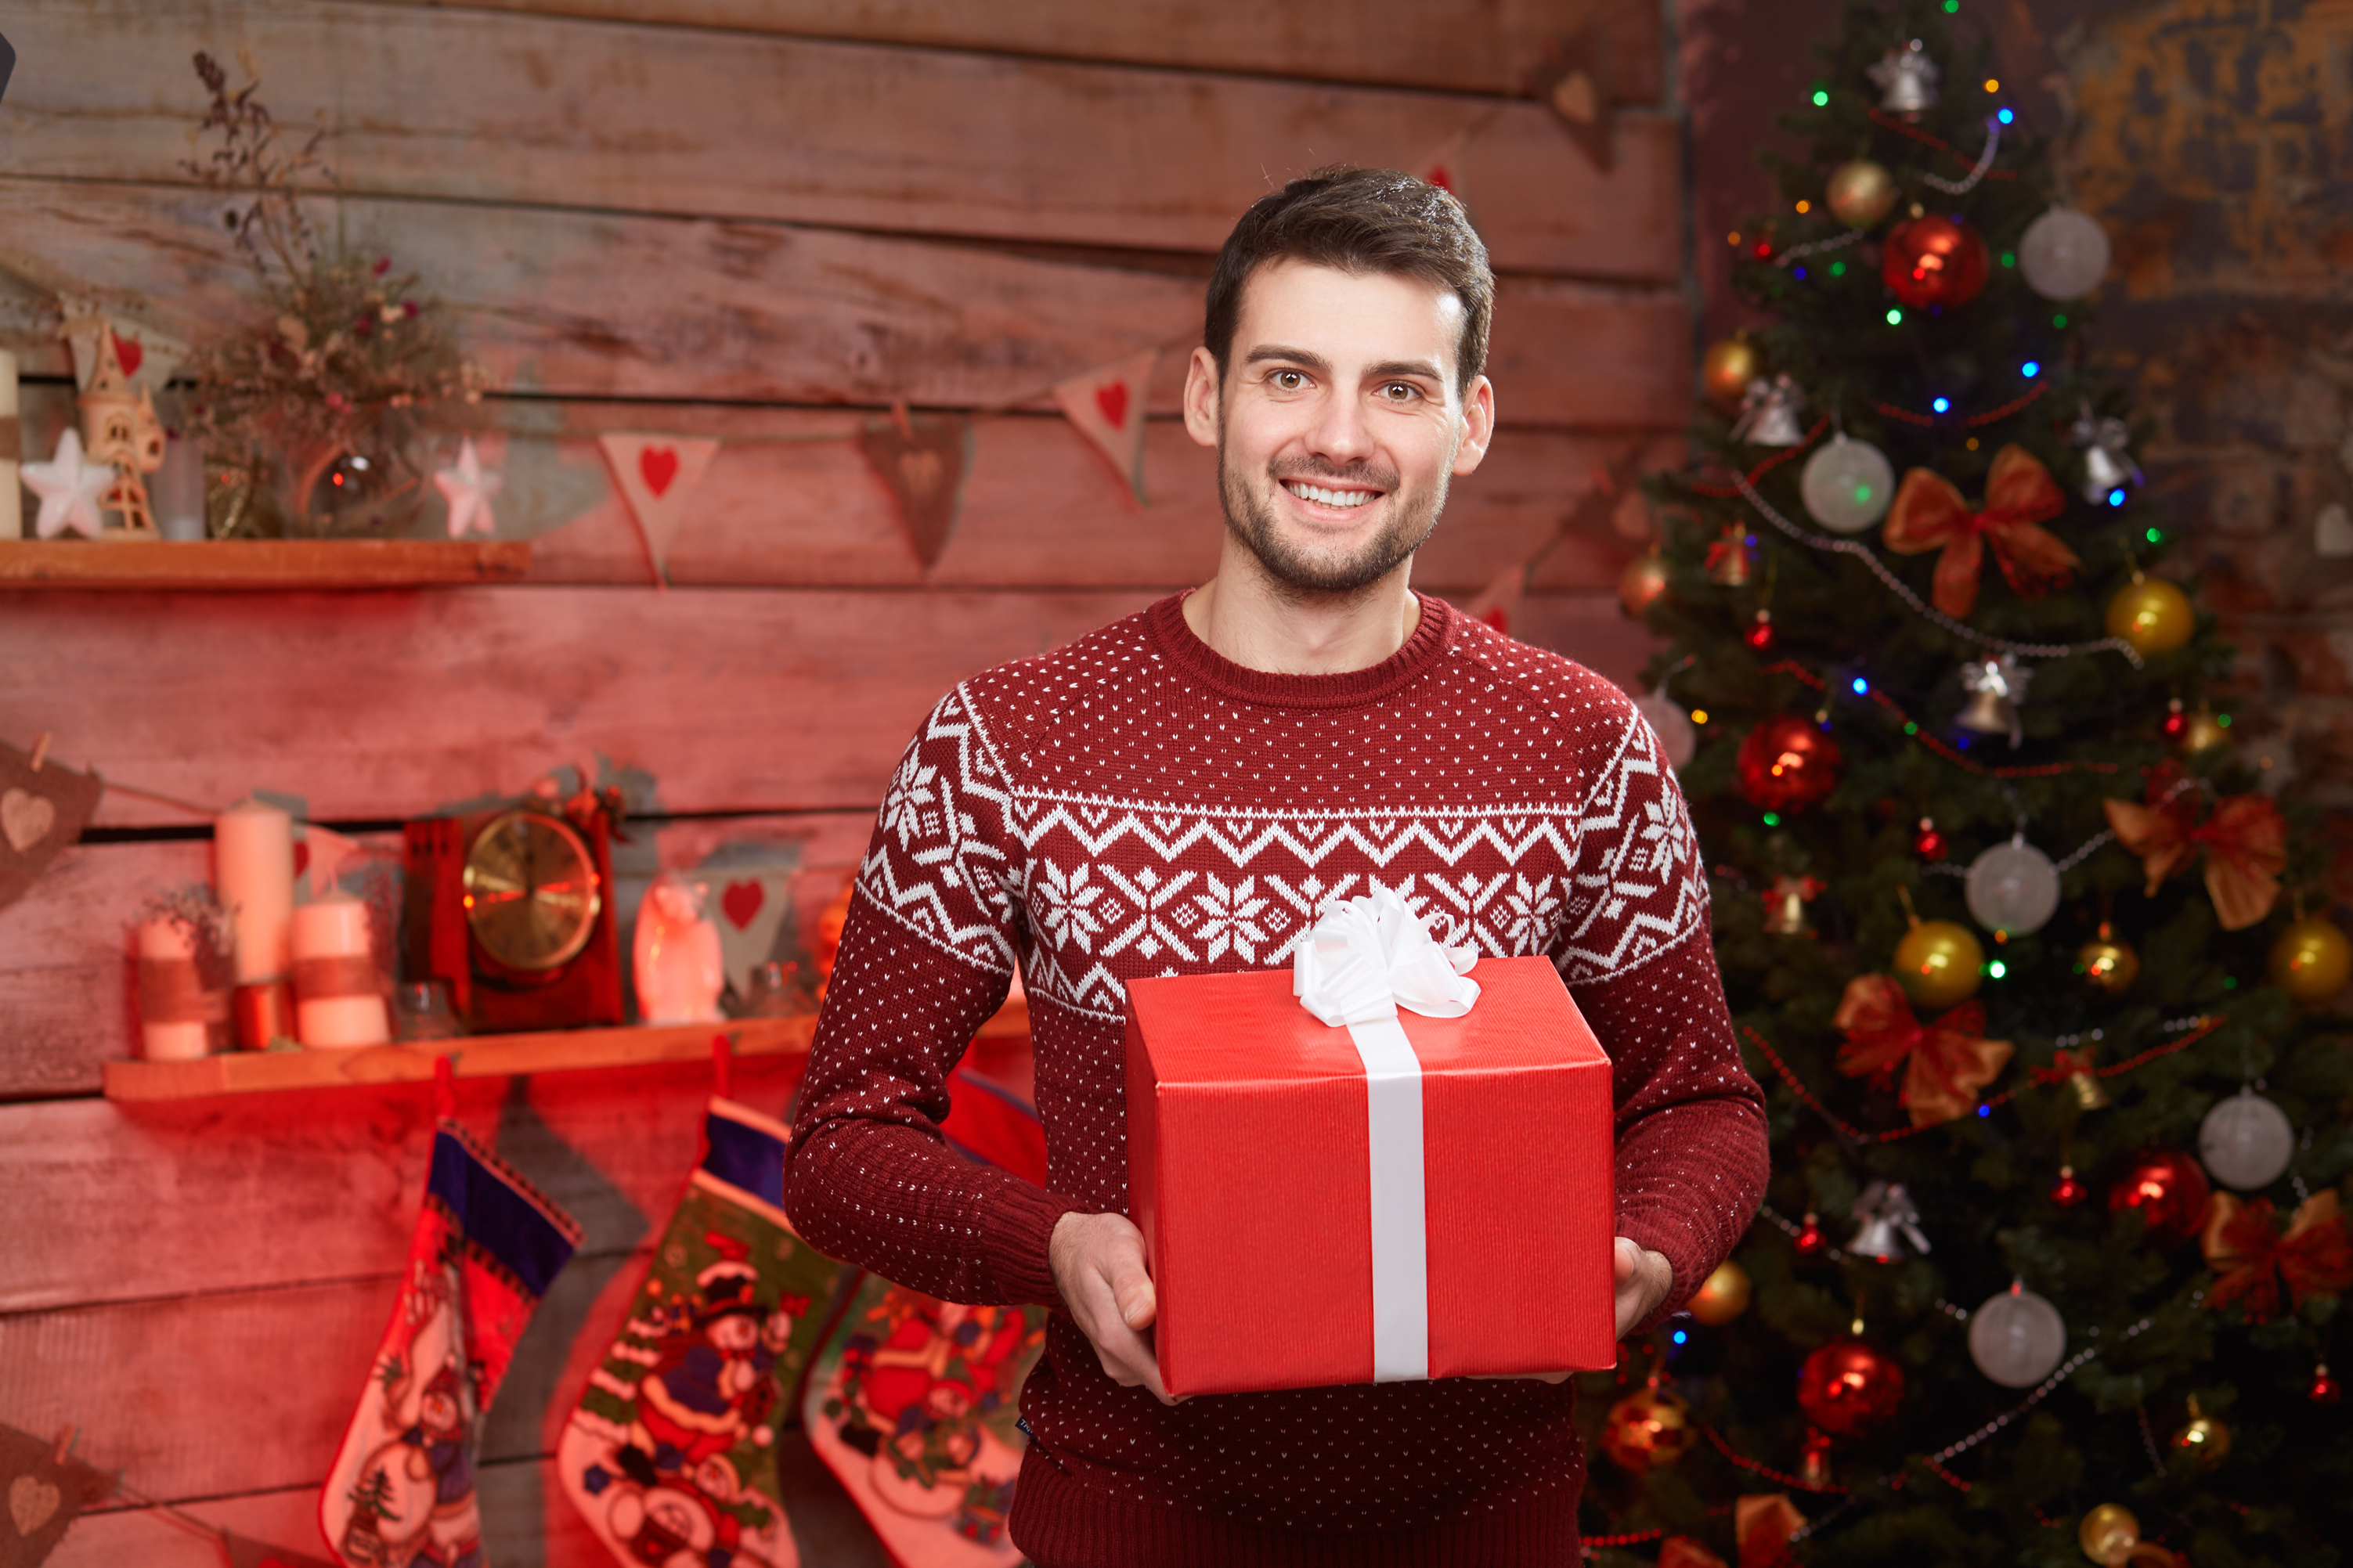 A happy man holding a gift box during Christmas | Source: Shutterstock